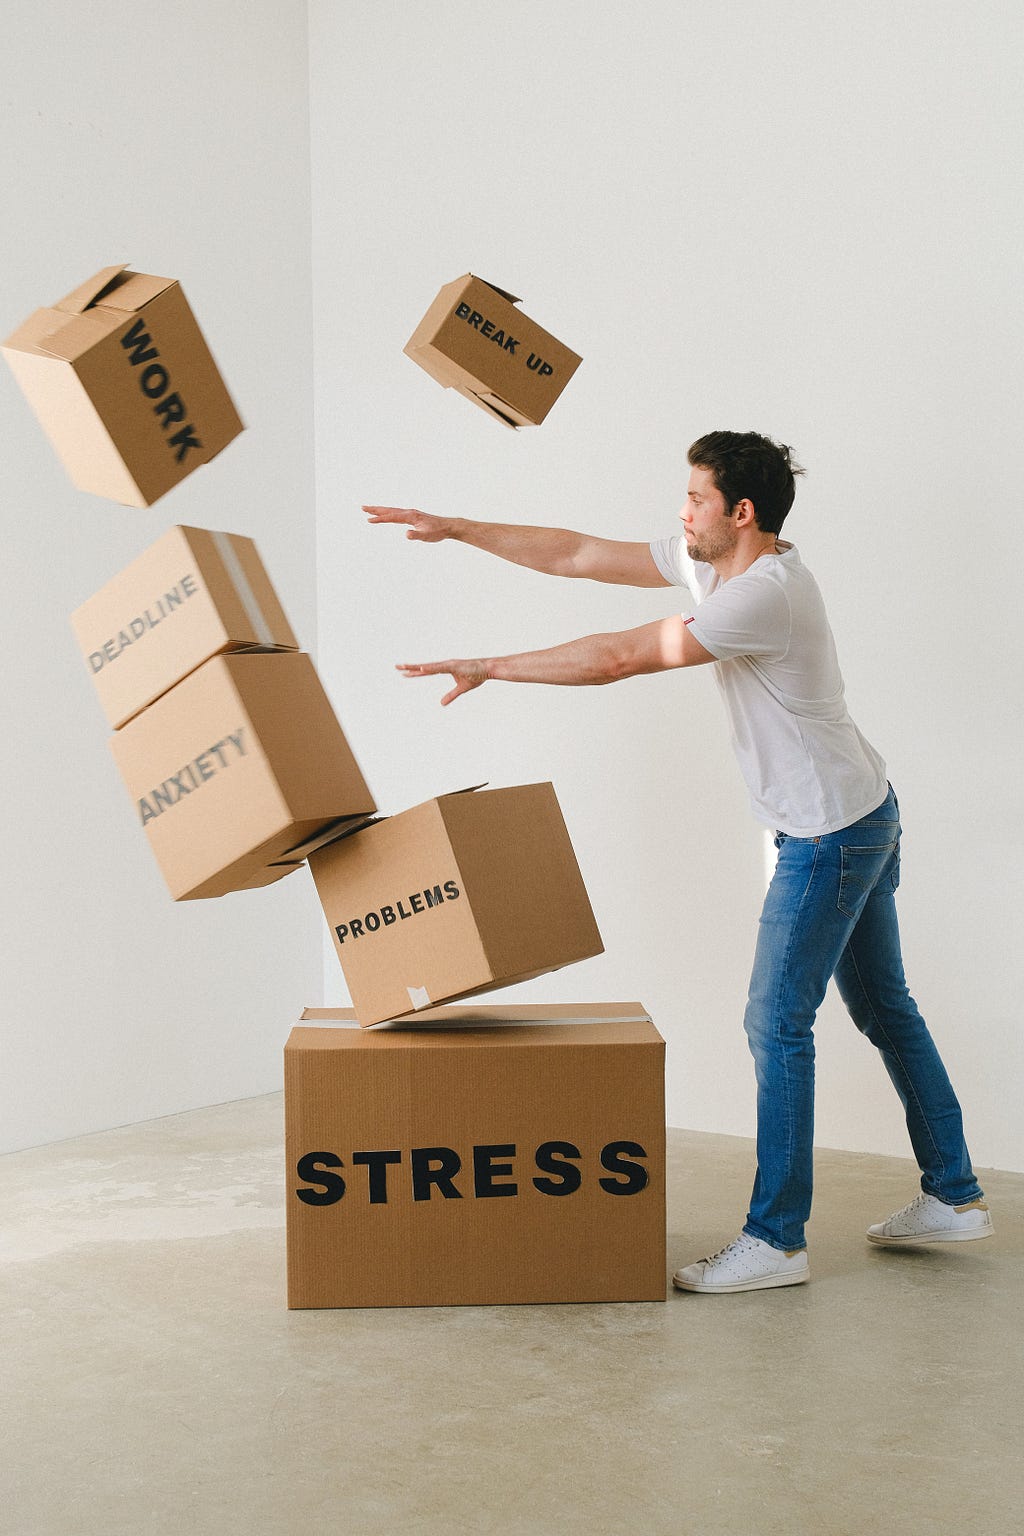 man pushing boxes named stress, anxiety, problems and deadlines